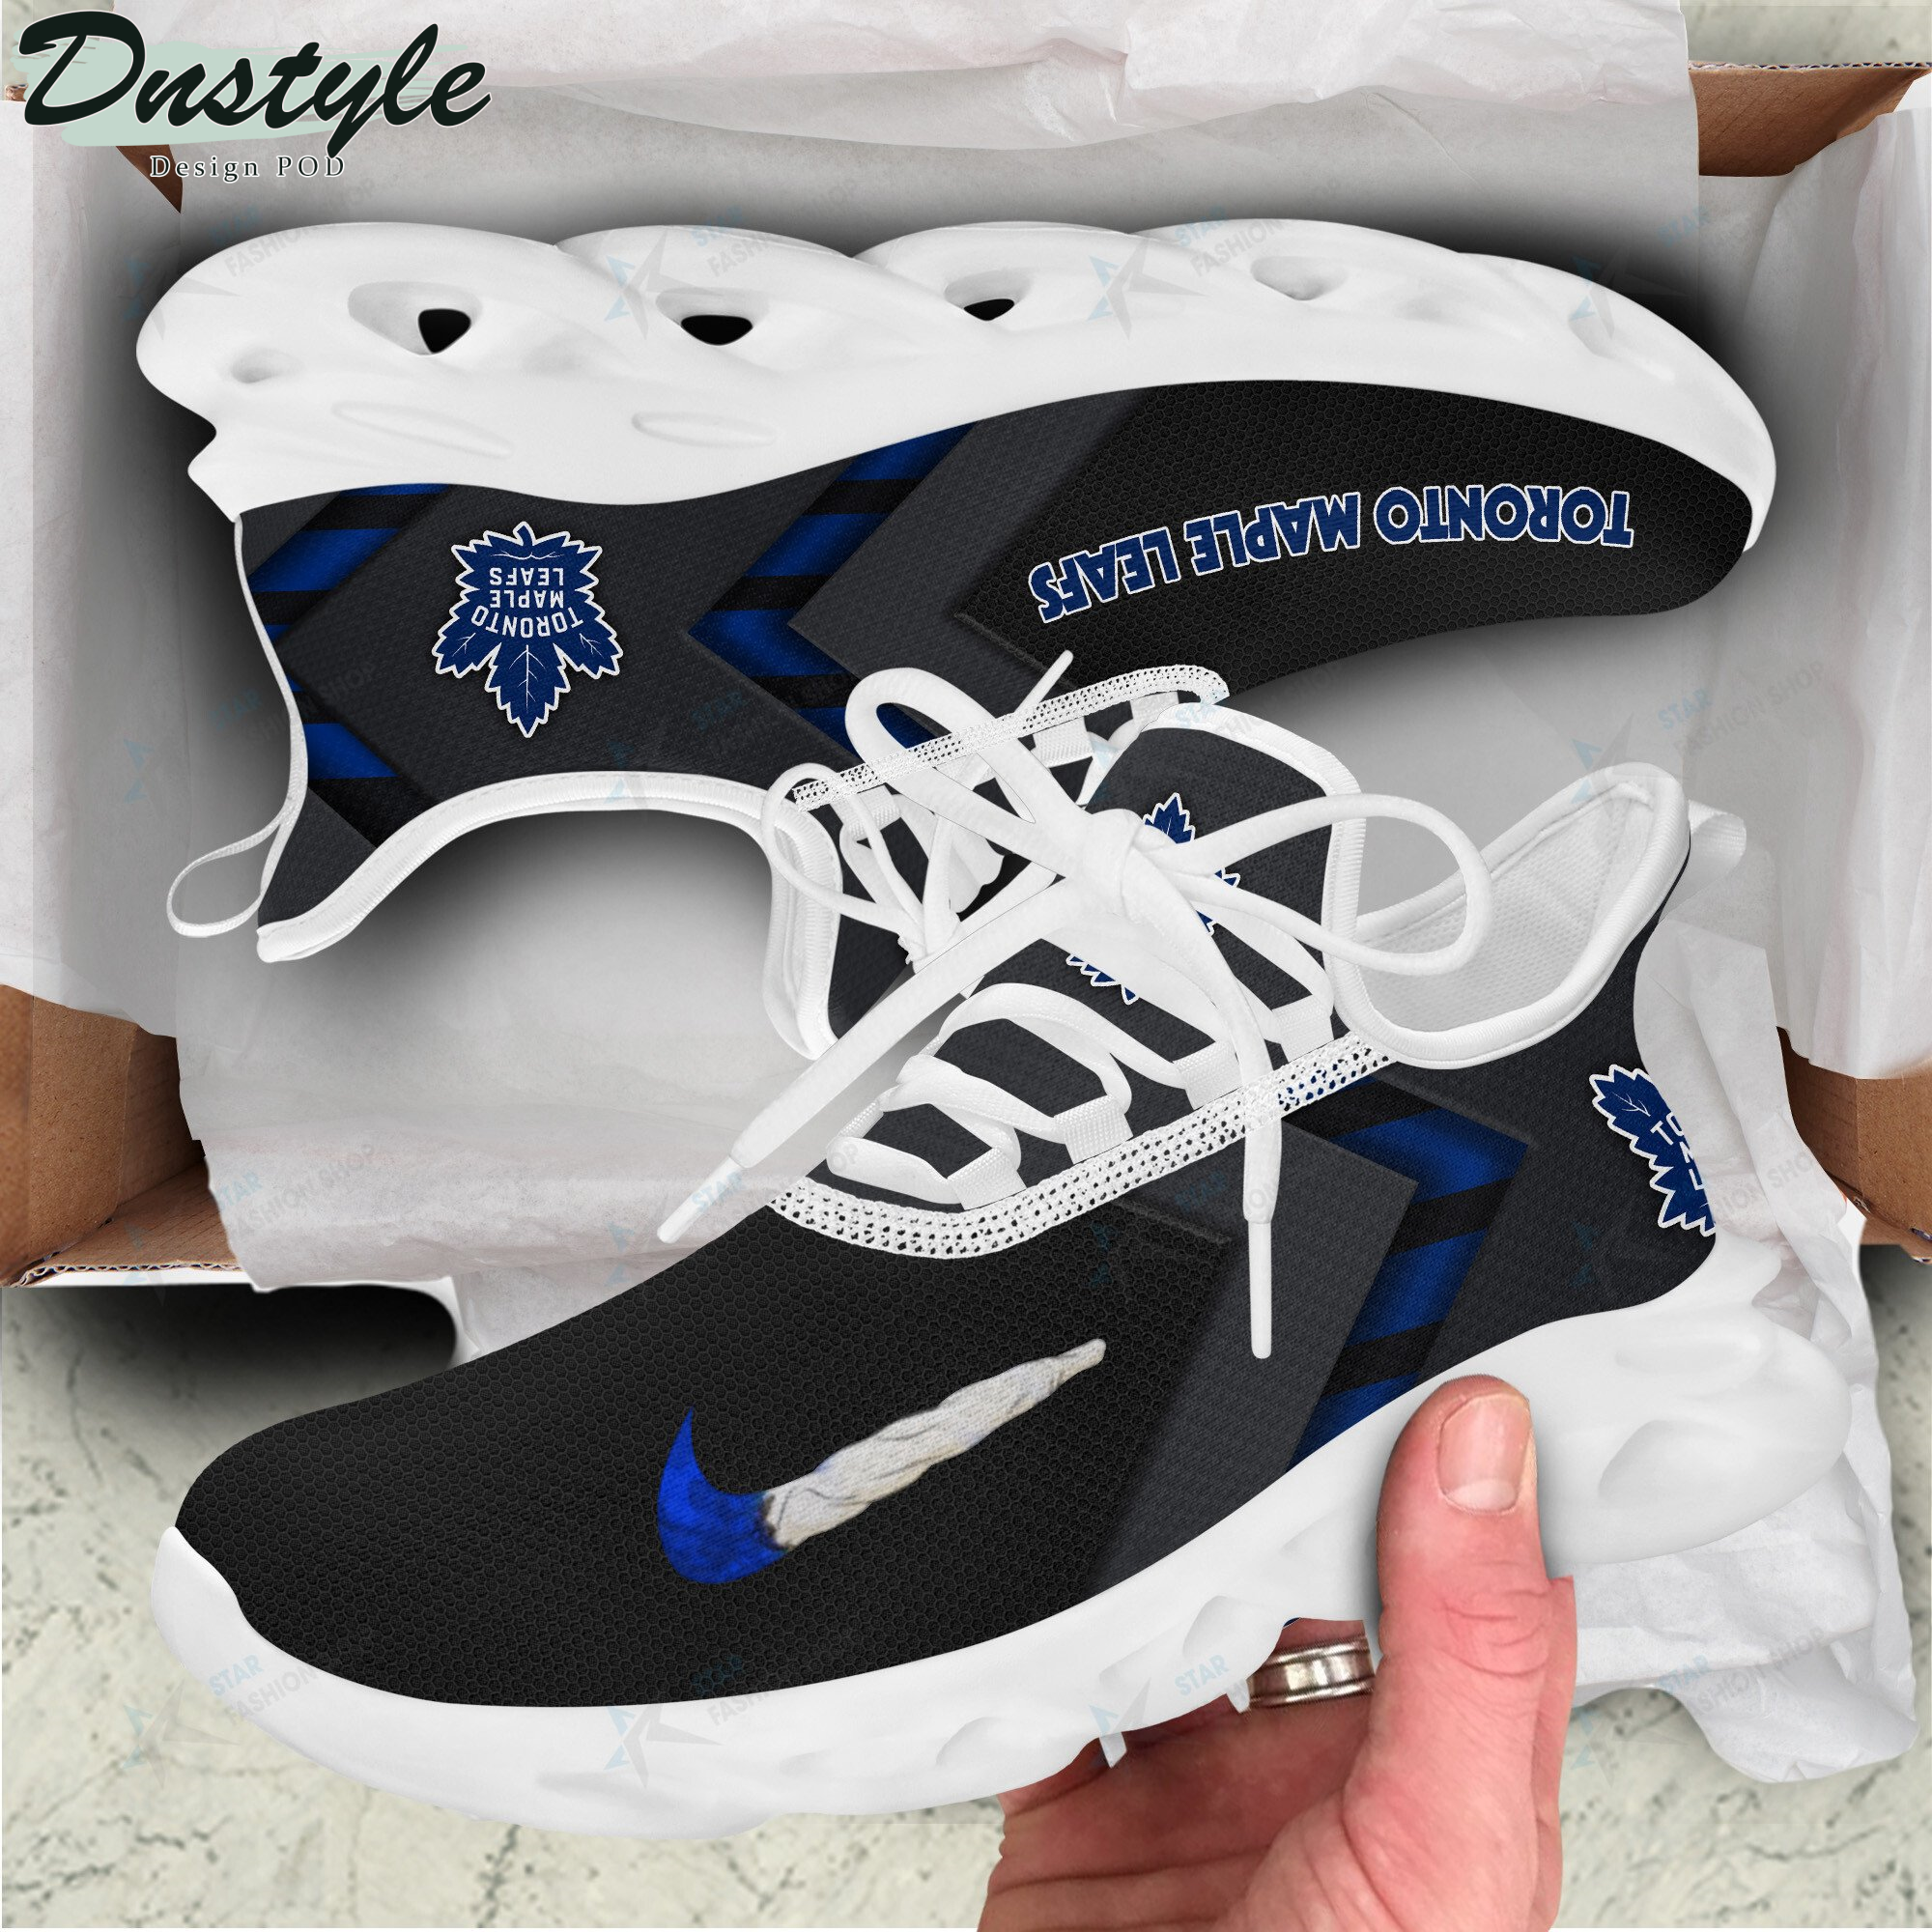 Toronto Maple Leafs max soul shoes